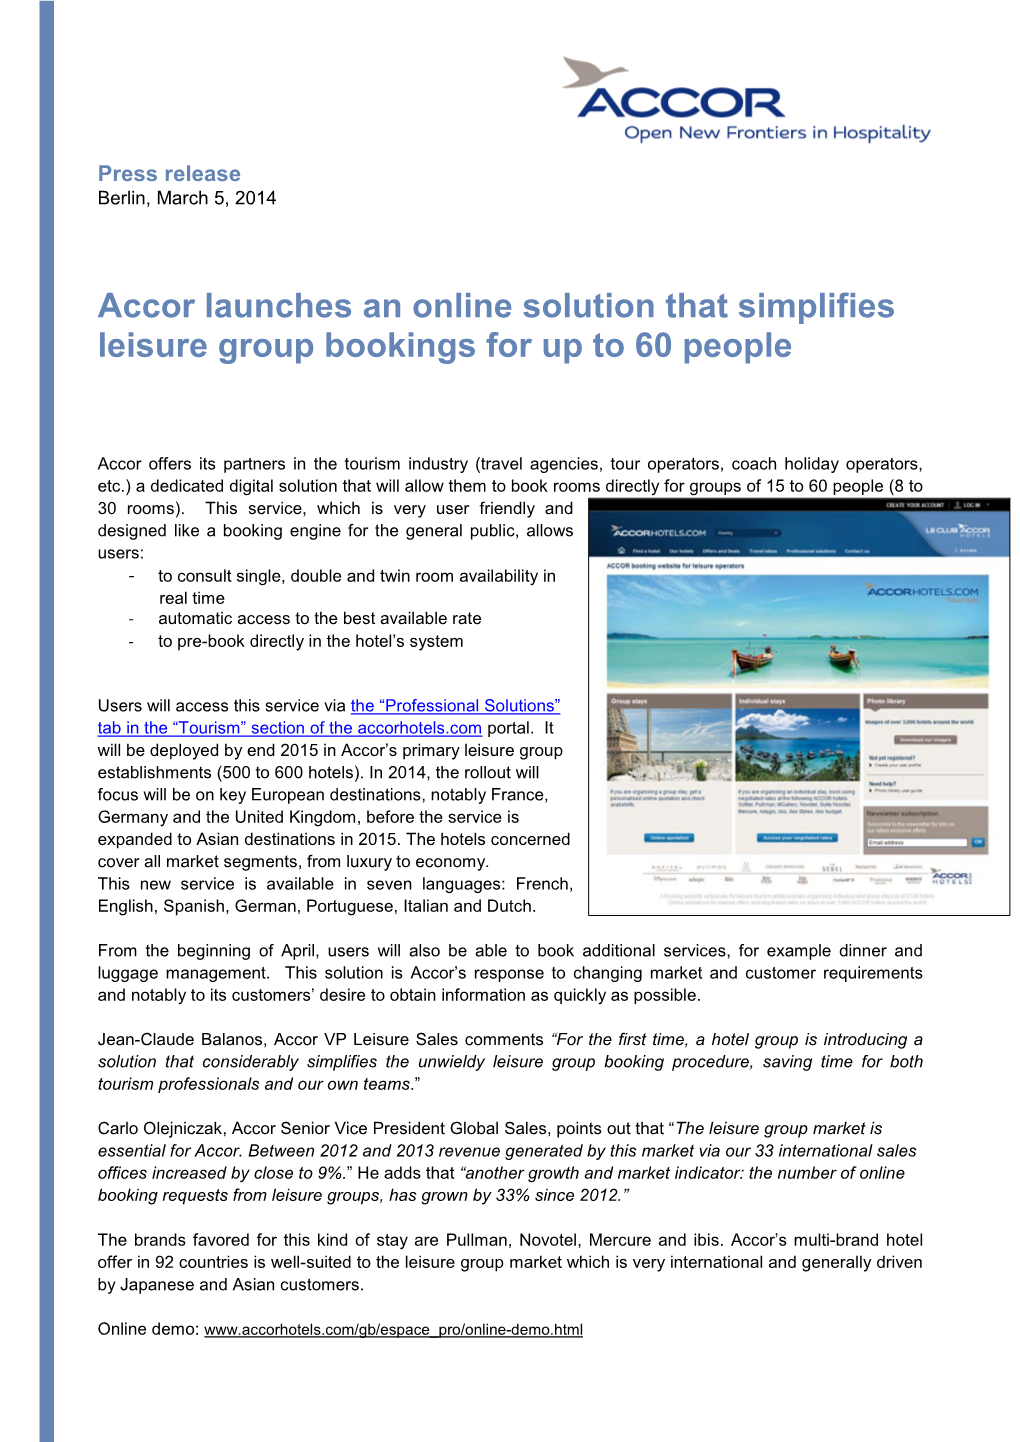 Accor Launches an Online Solution That Simplifies Leisure Group Bookings for up to 60 People